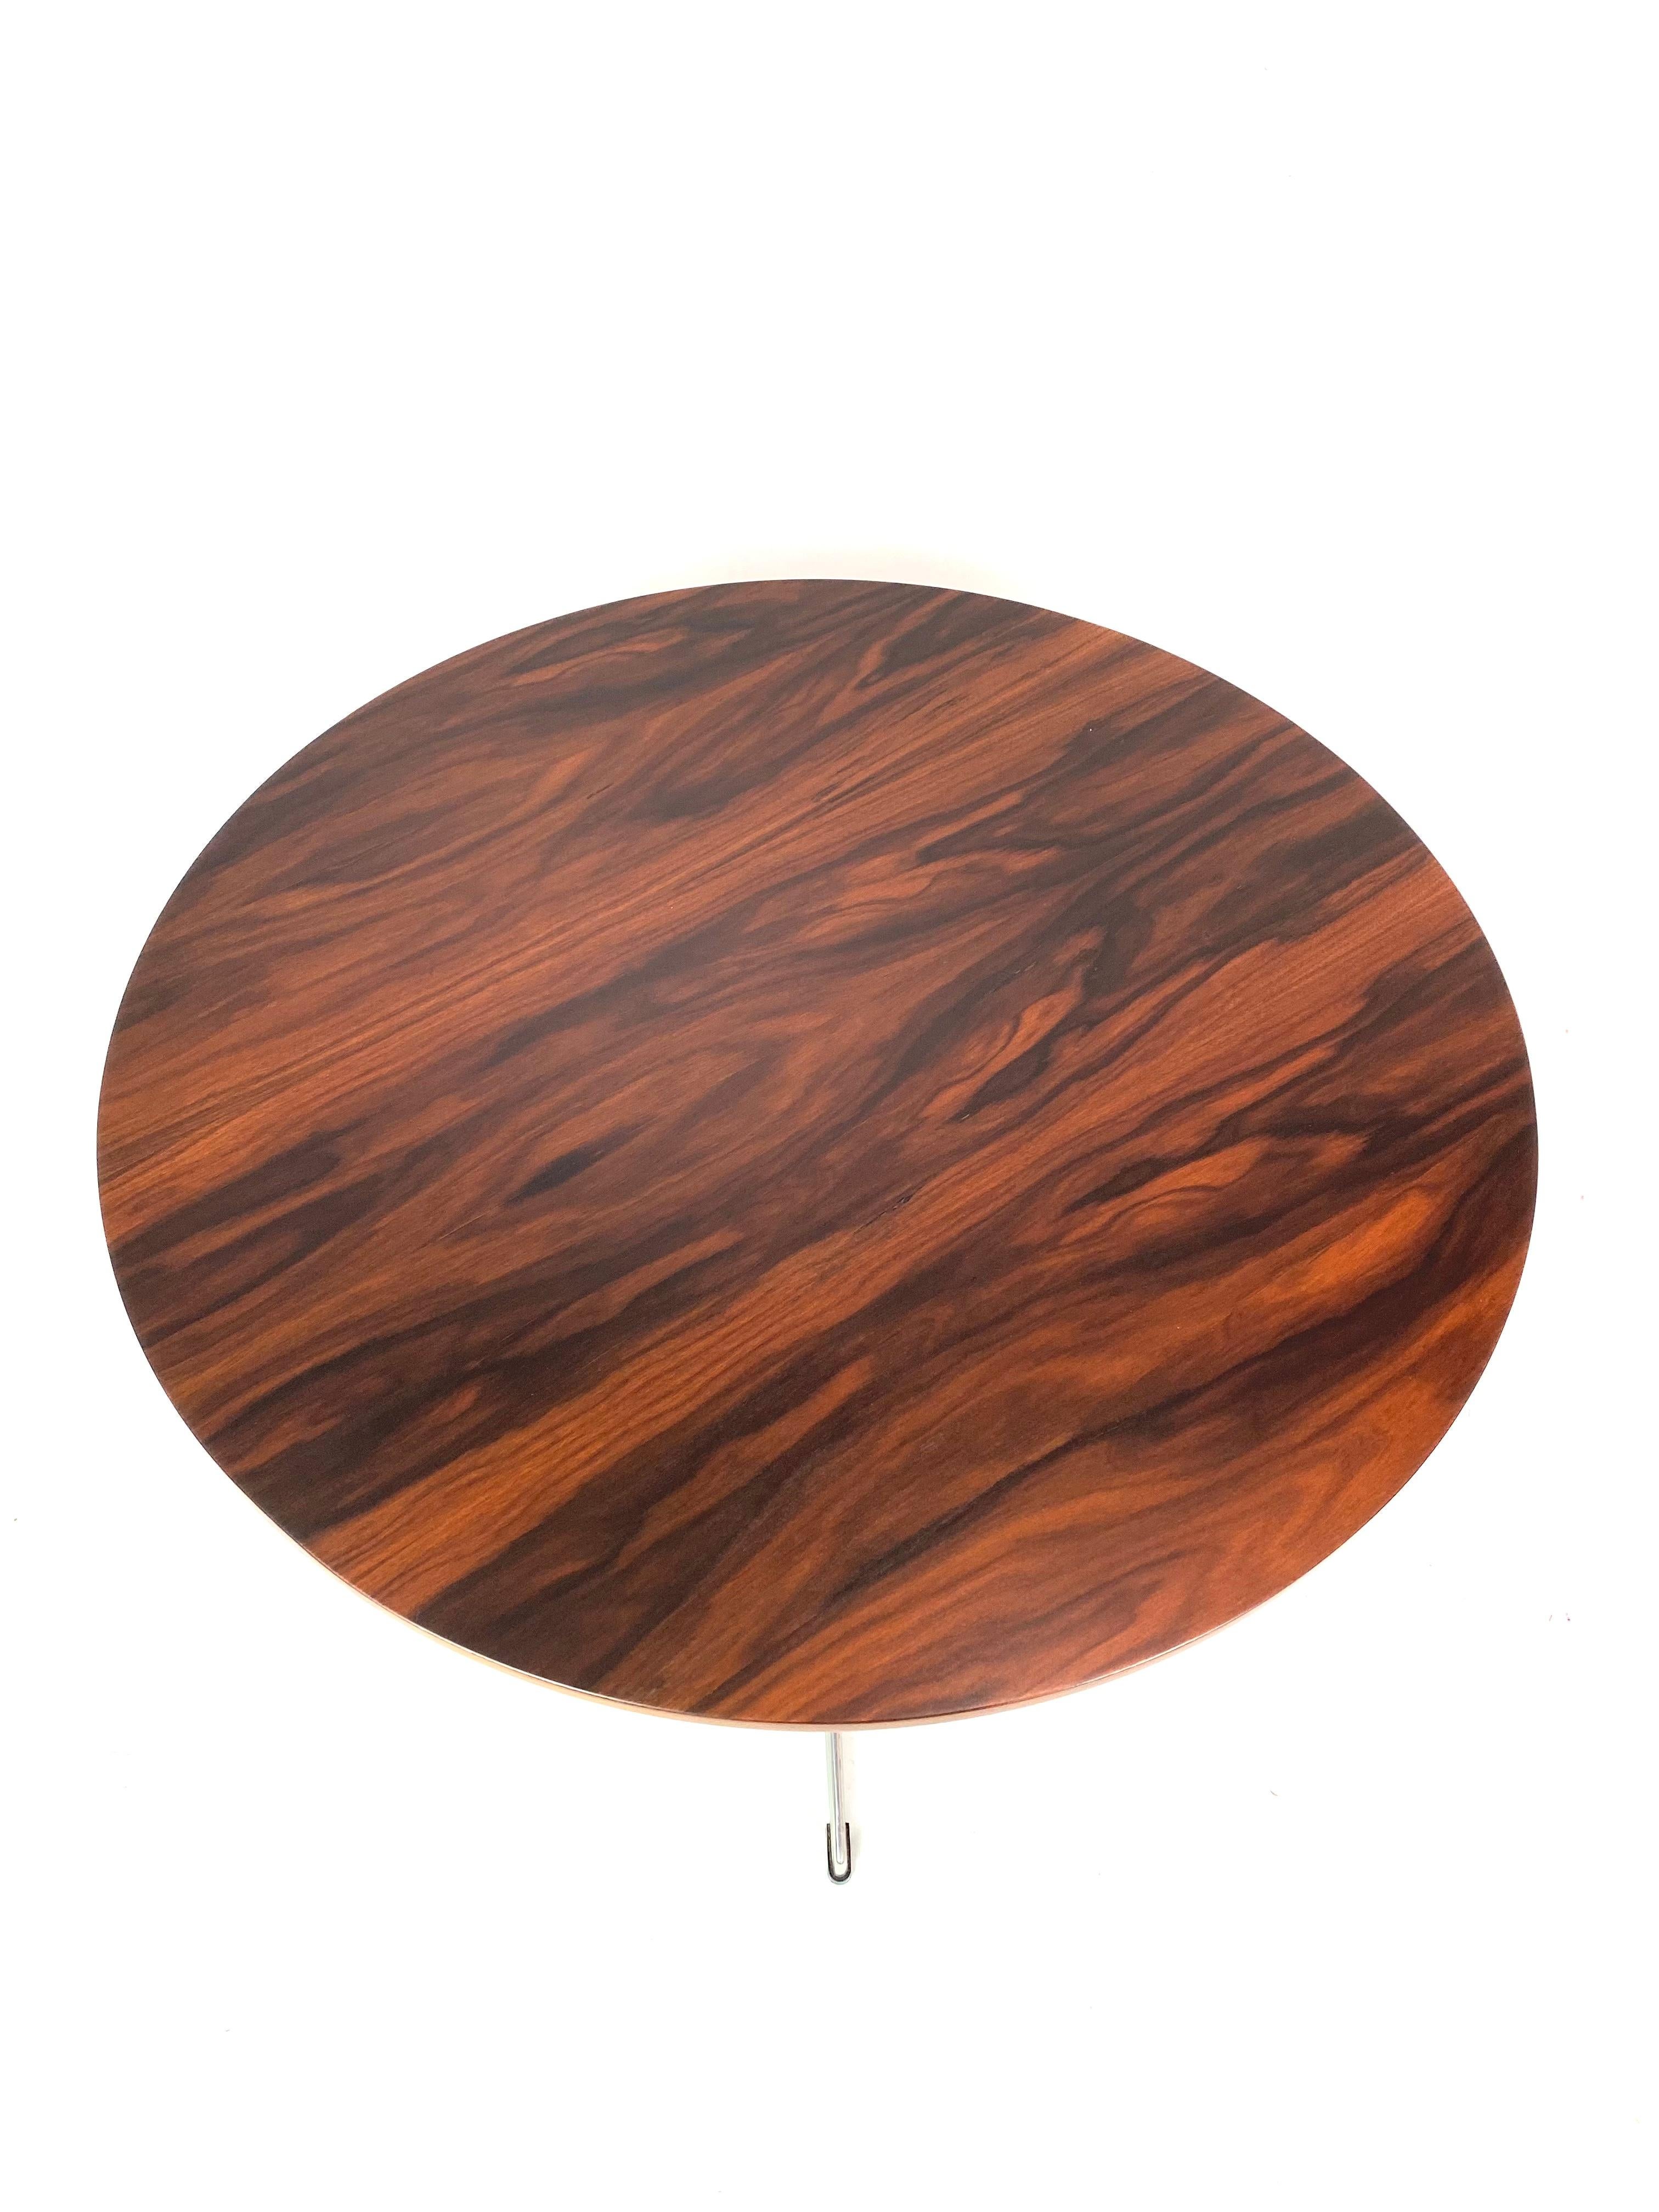 The coffee table in rosewood designed by Arne Jacobsen and manufactured by Fritz Hansen in 1987 is a beautiful piece of furniture that showcases Jacobsen's signature modernist style. The table is made of high-quality rosewood, which is known for its